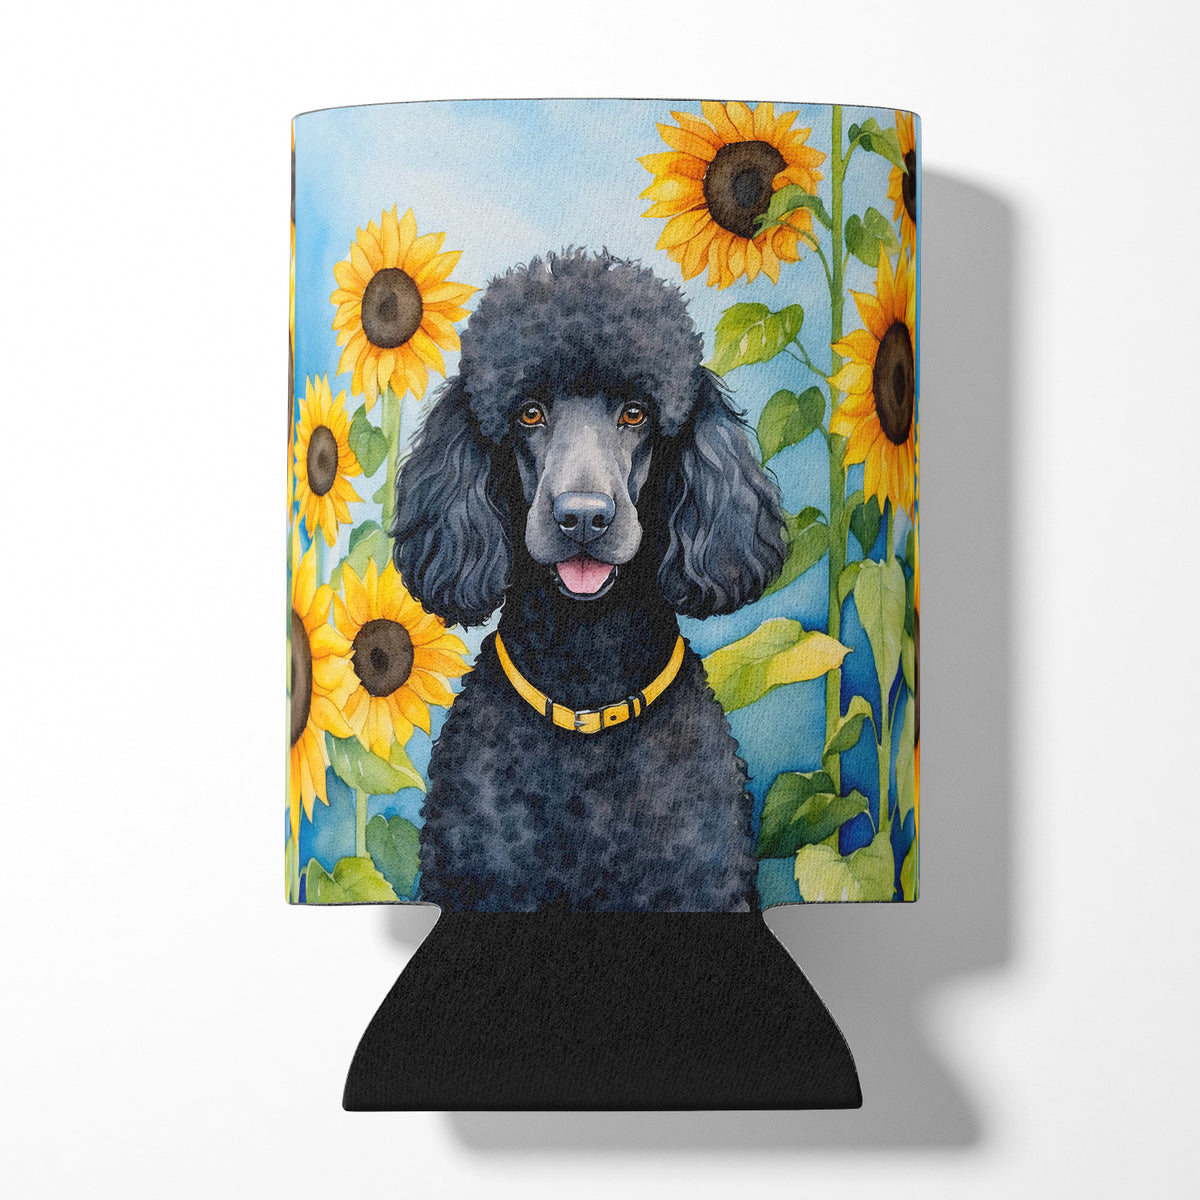 Buy this Black Poodle in Sunflowers Can or Bottle Hugger